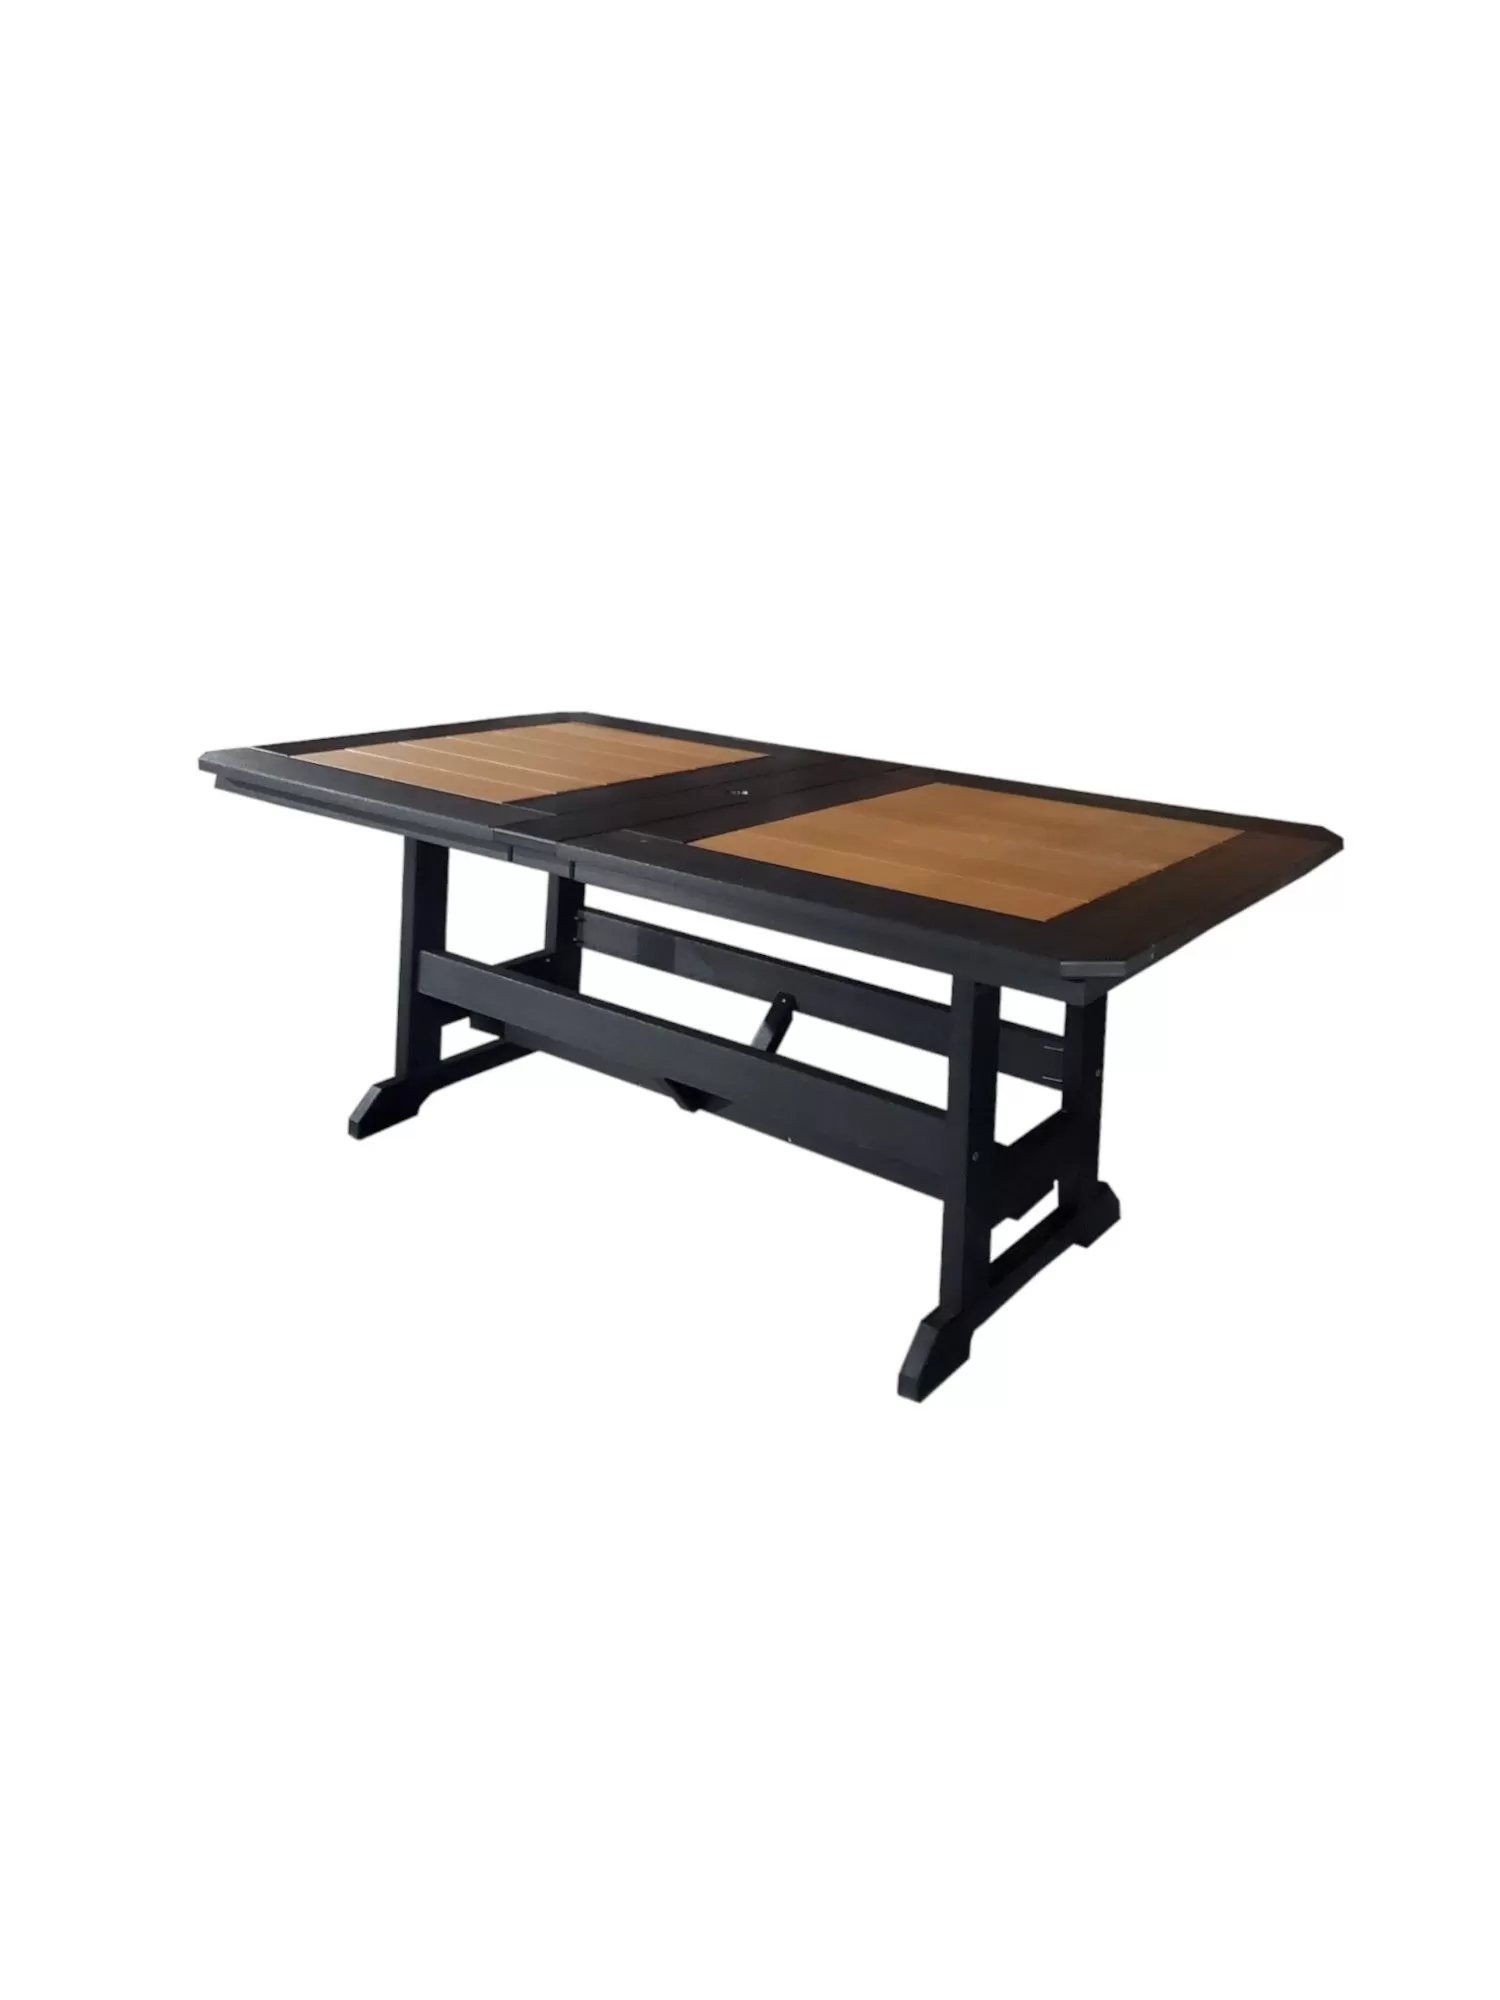 42" x 75" Outdoor Extension Table